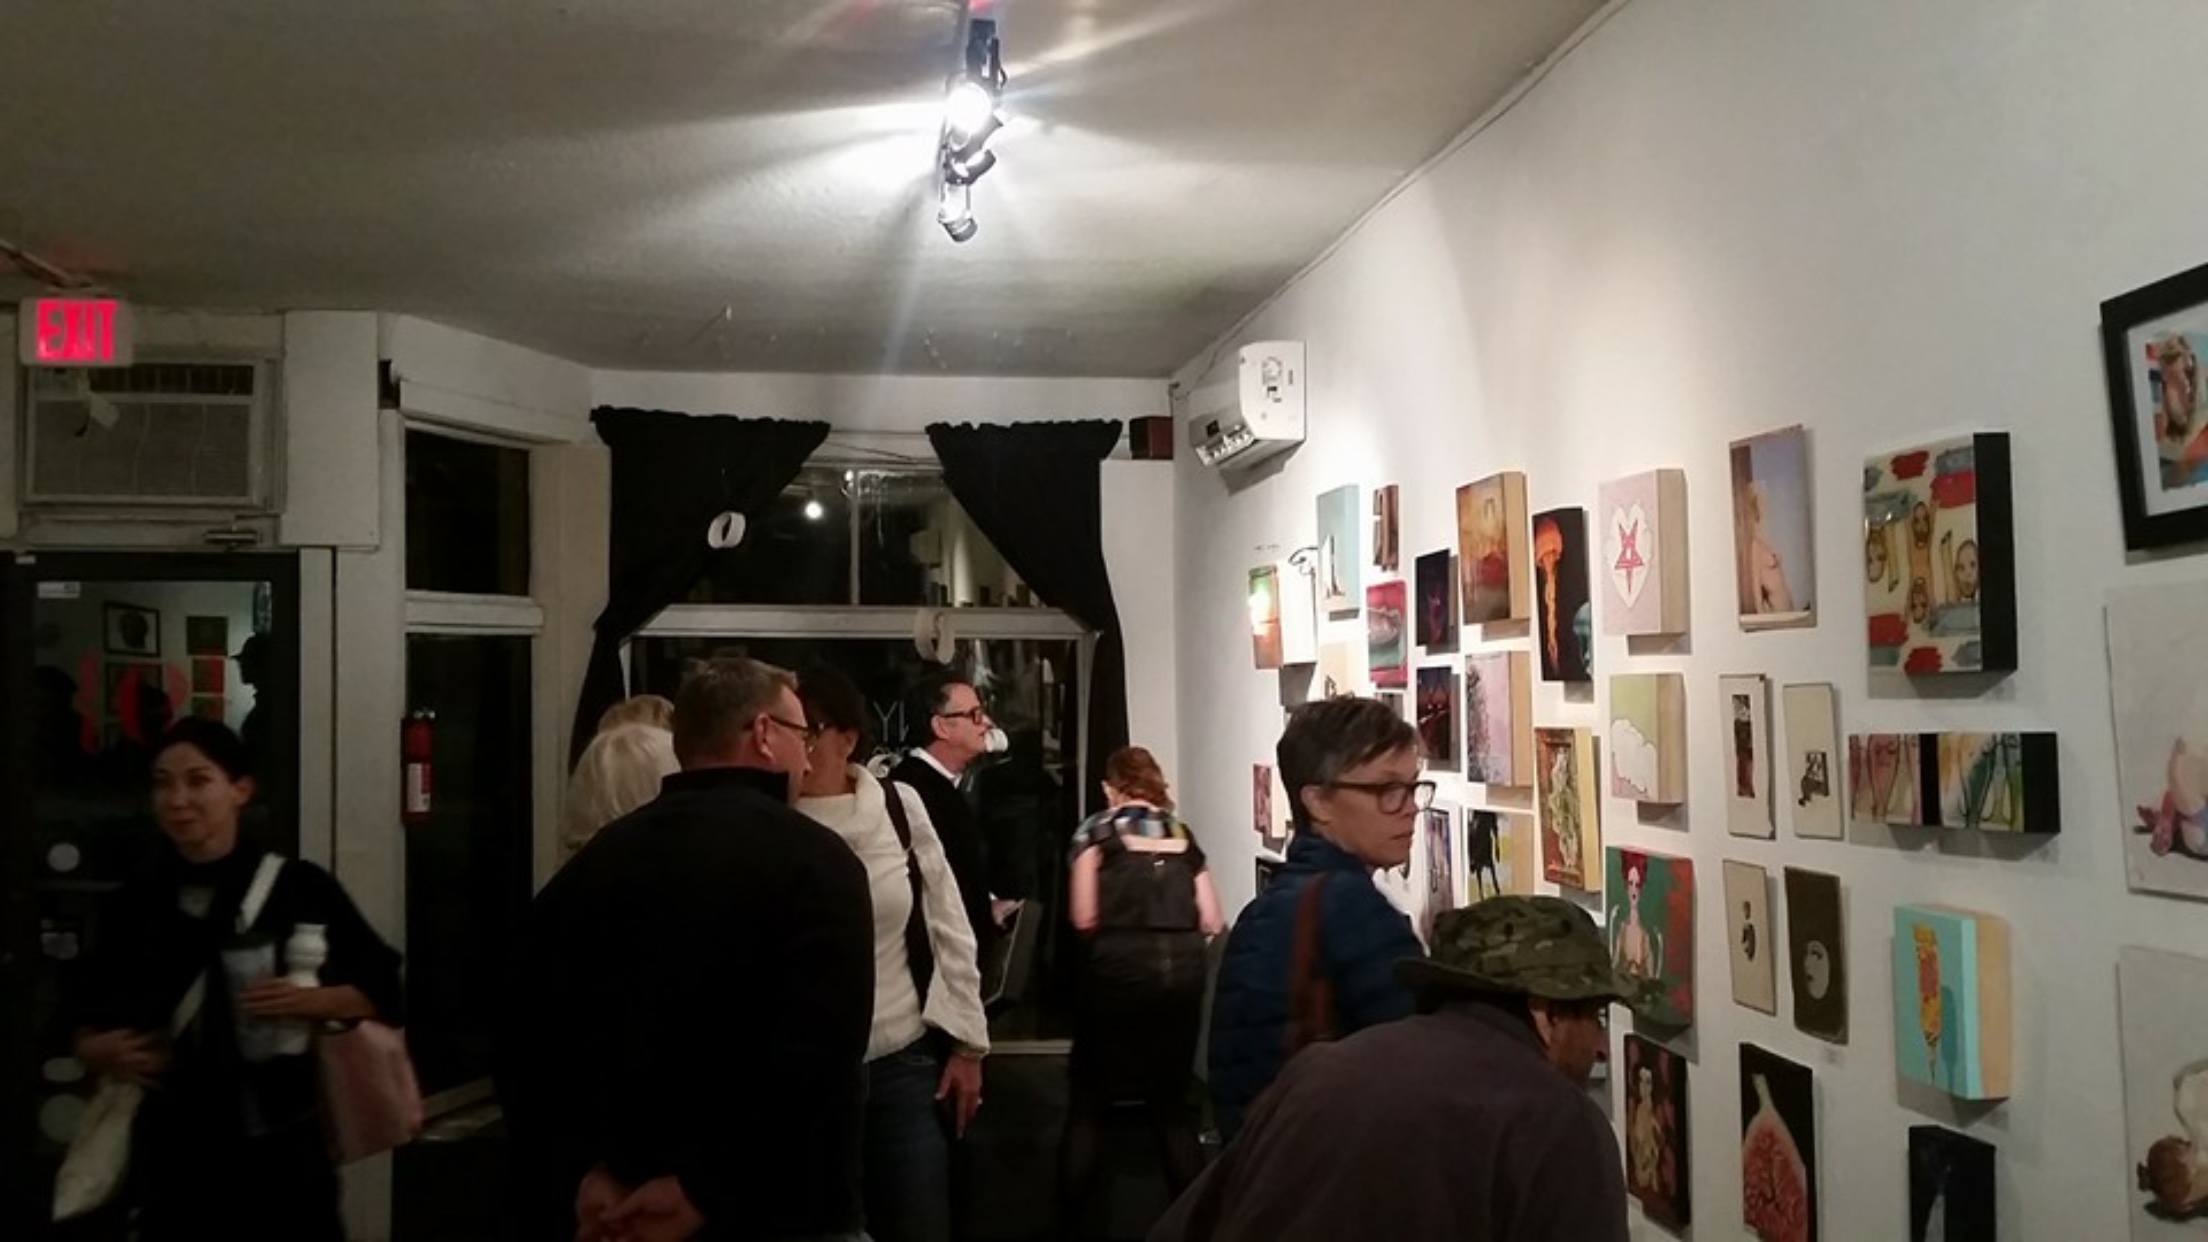 9 Gallery group show